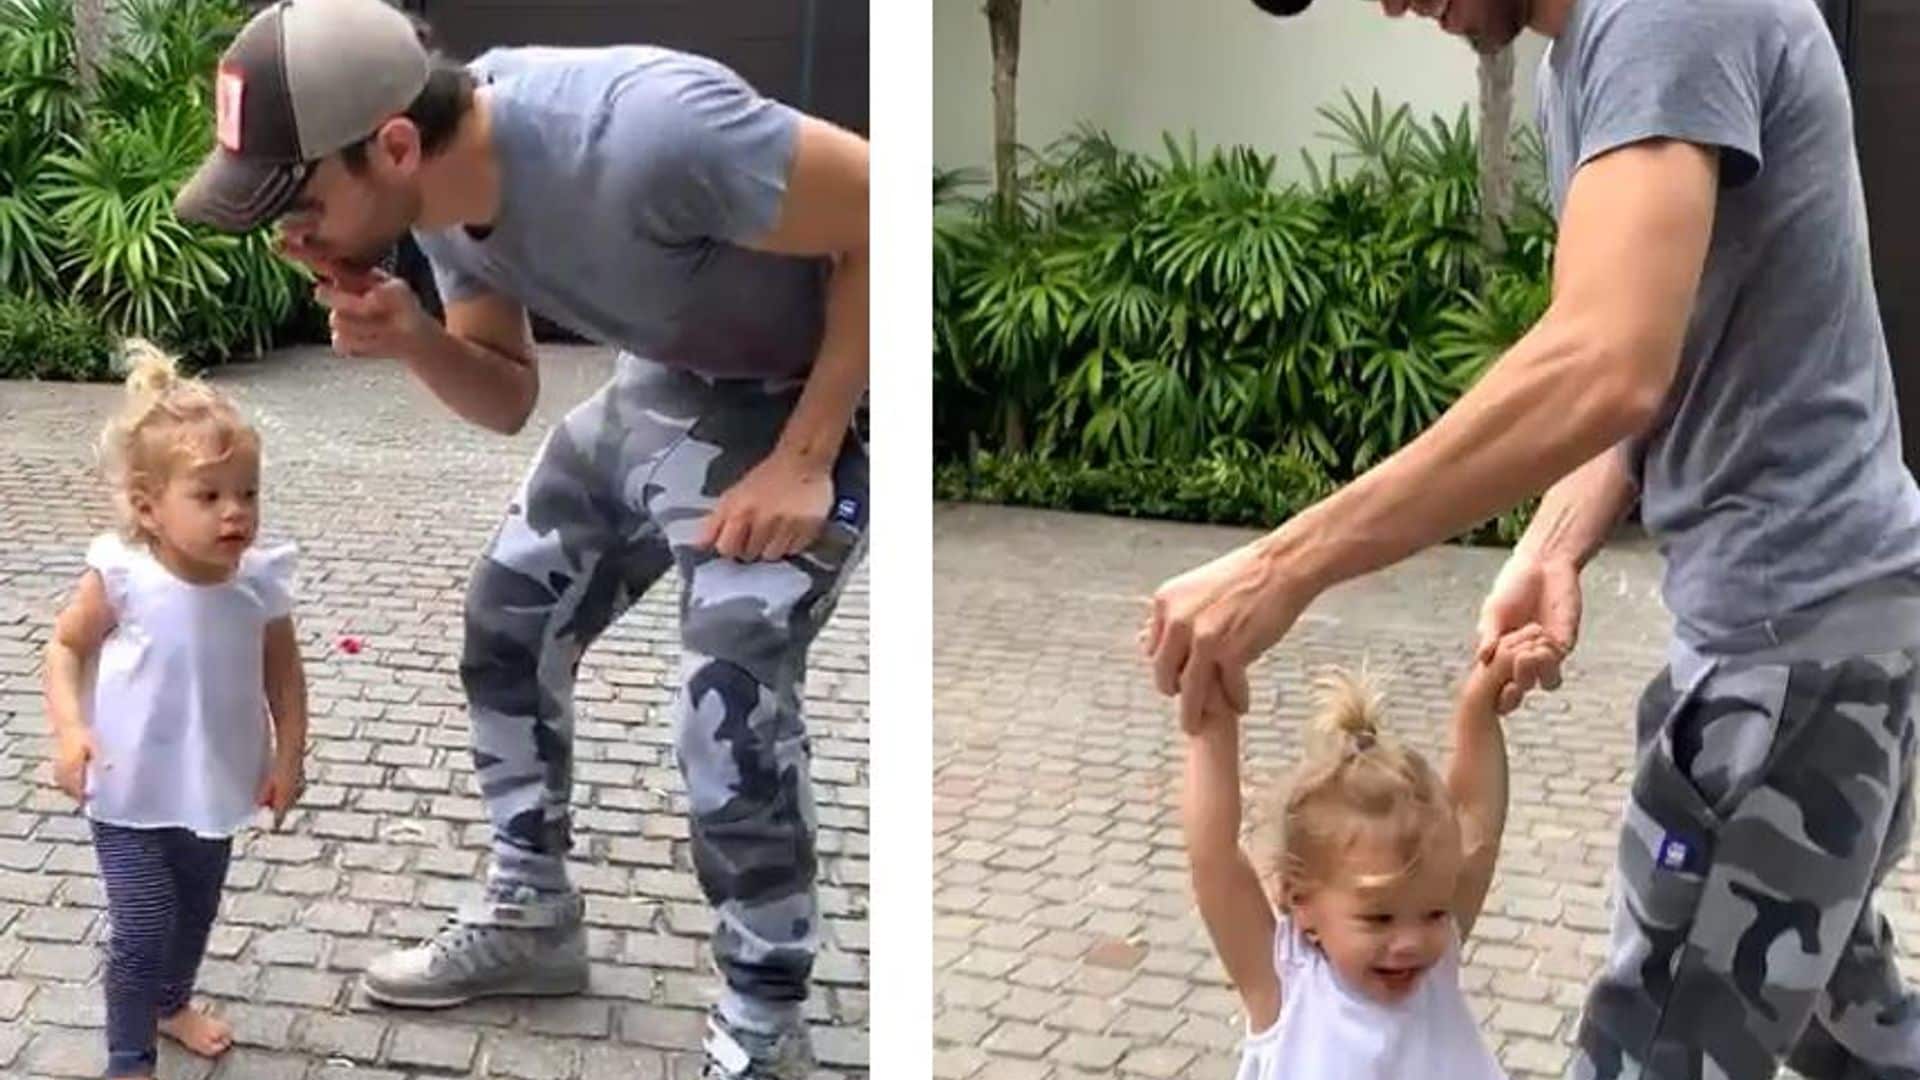 Enrique Iglesias sings and dances with daughter Lucy